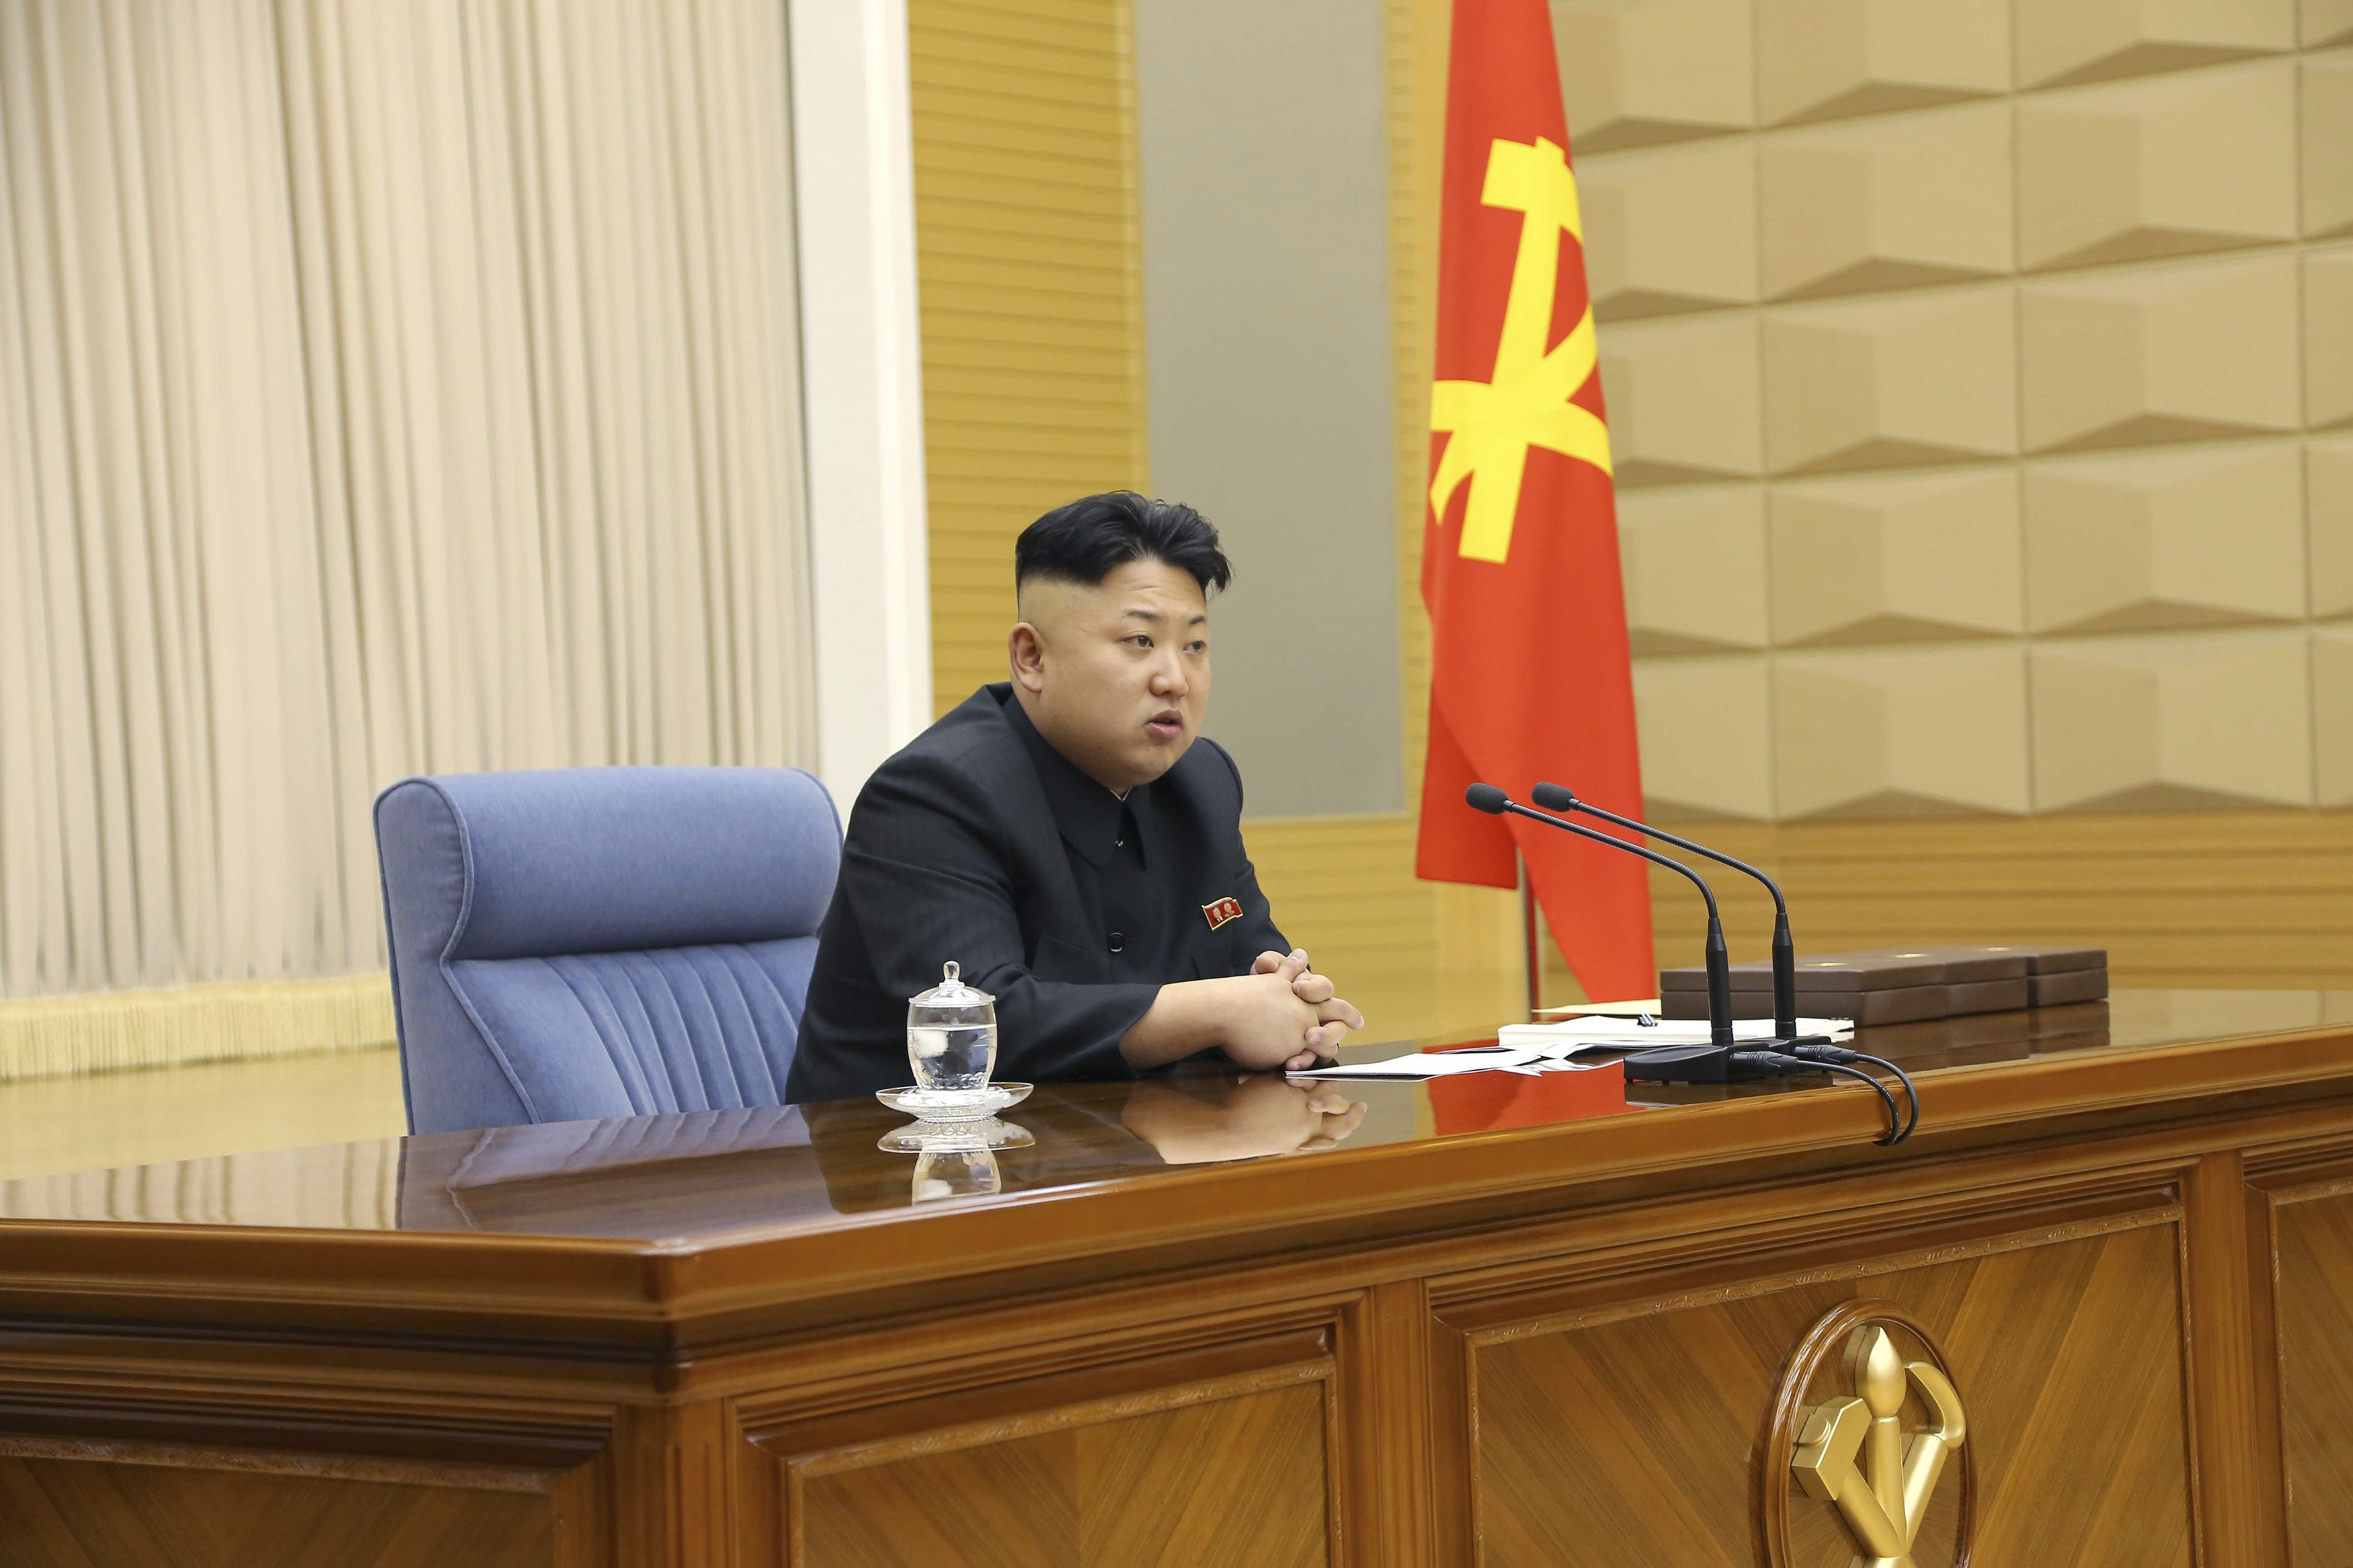 North Korea condemns U.N., threatens a 'new form' of nuclear test